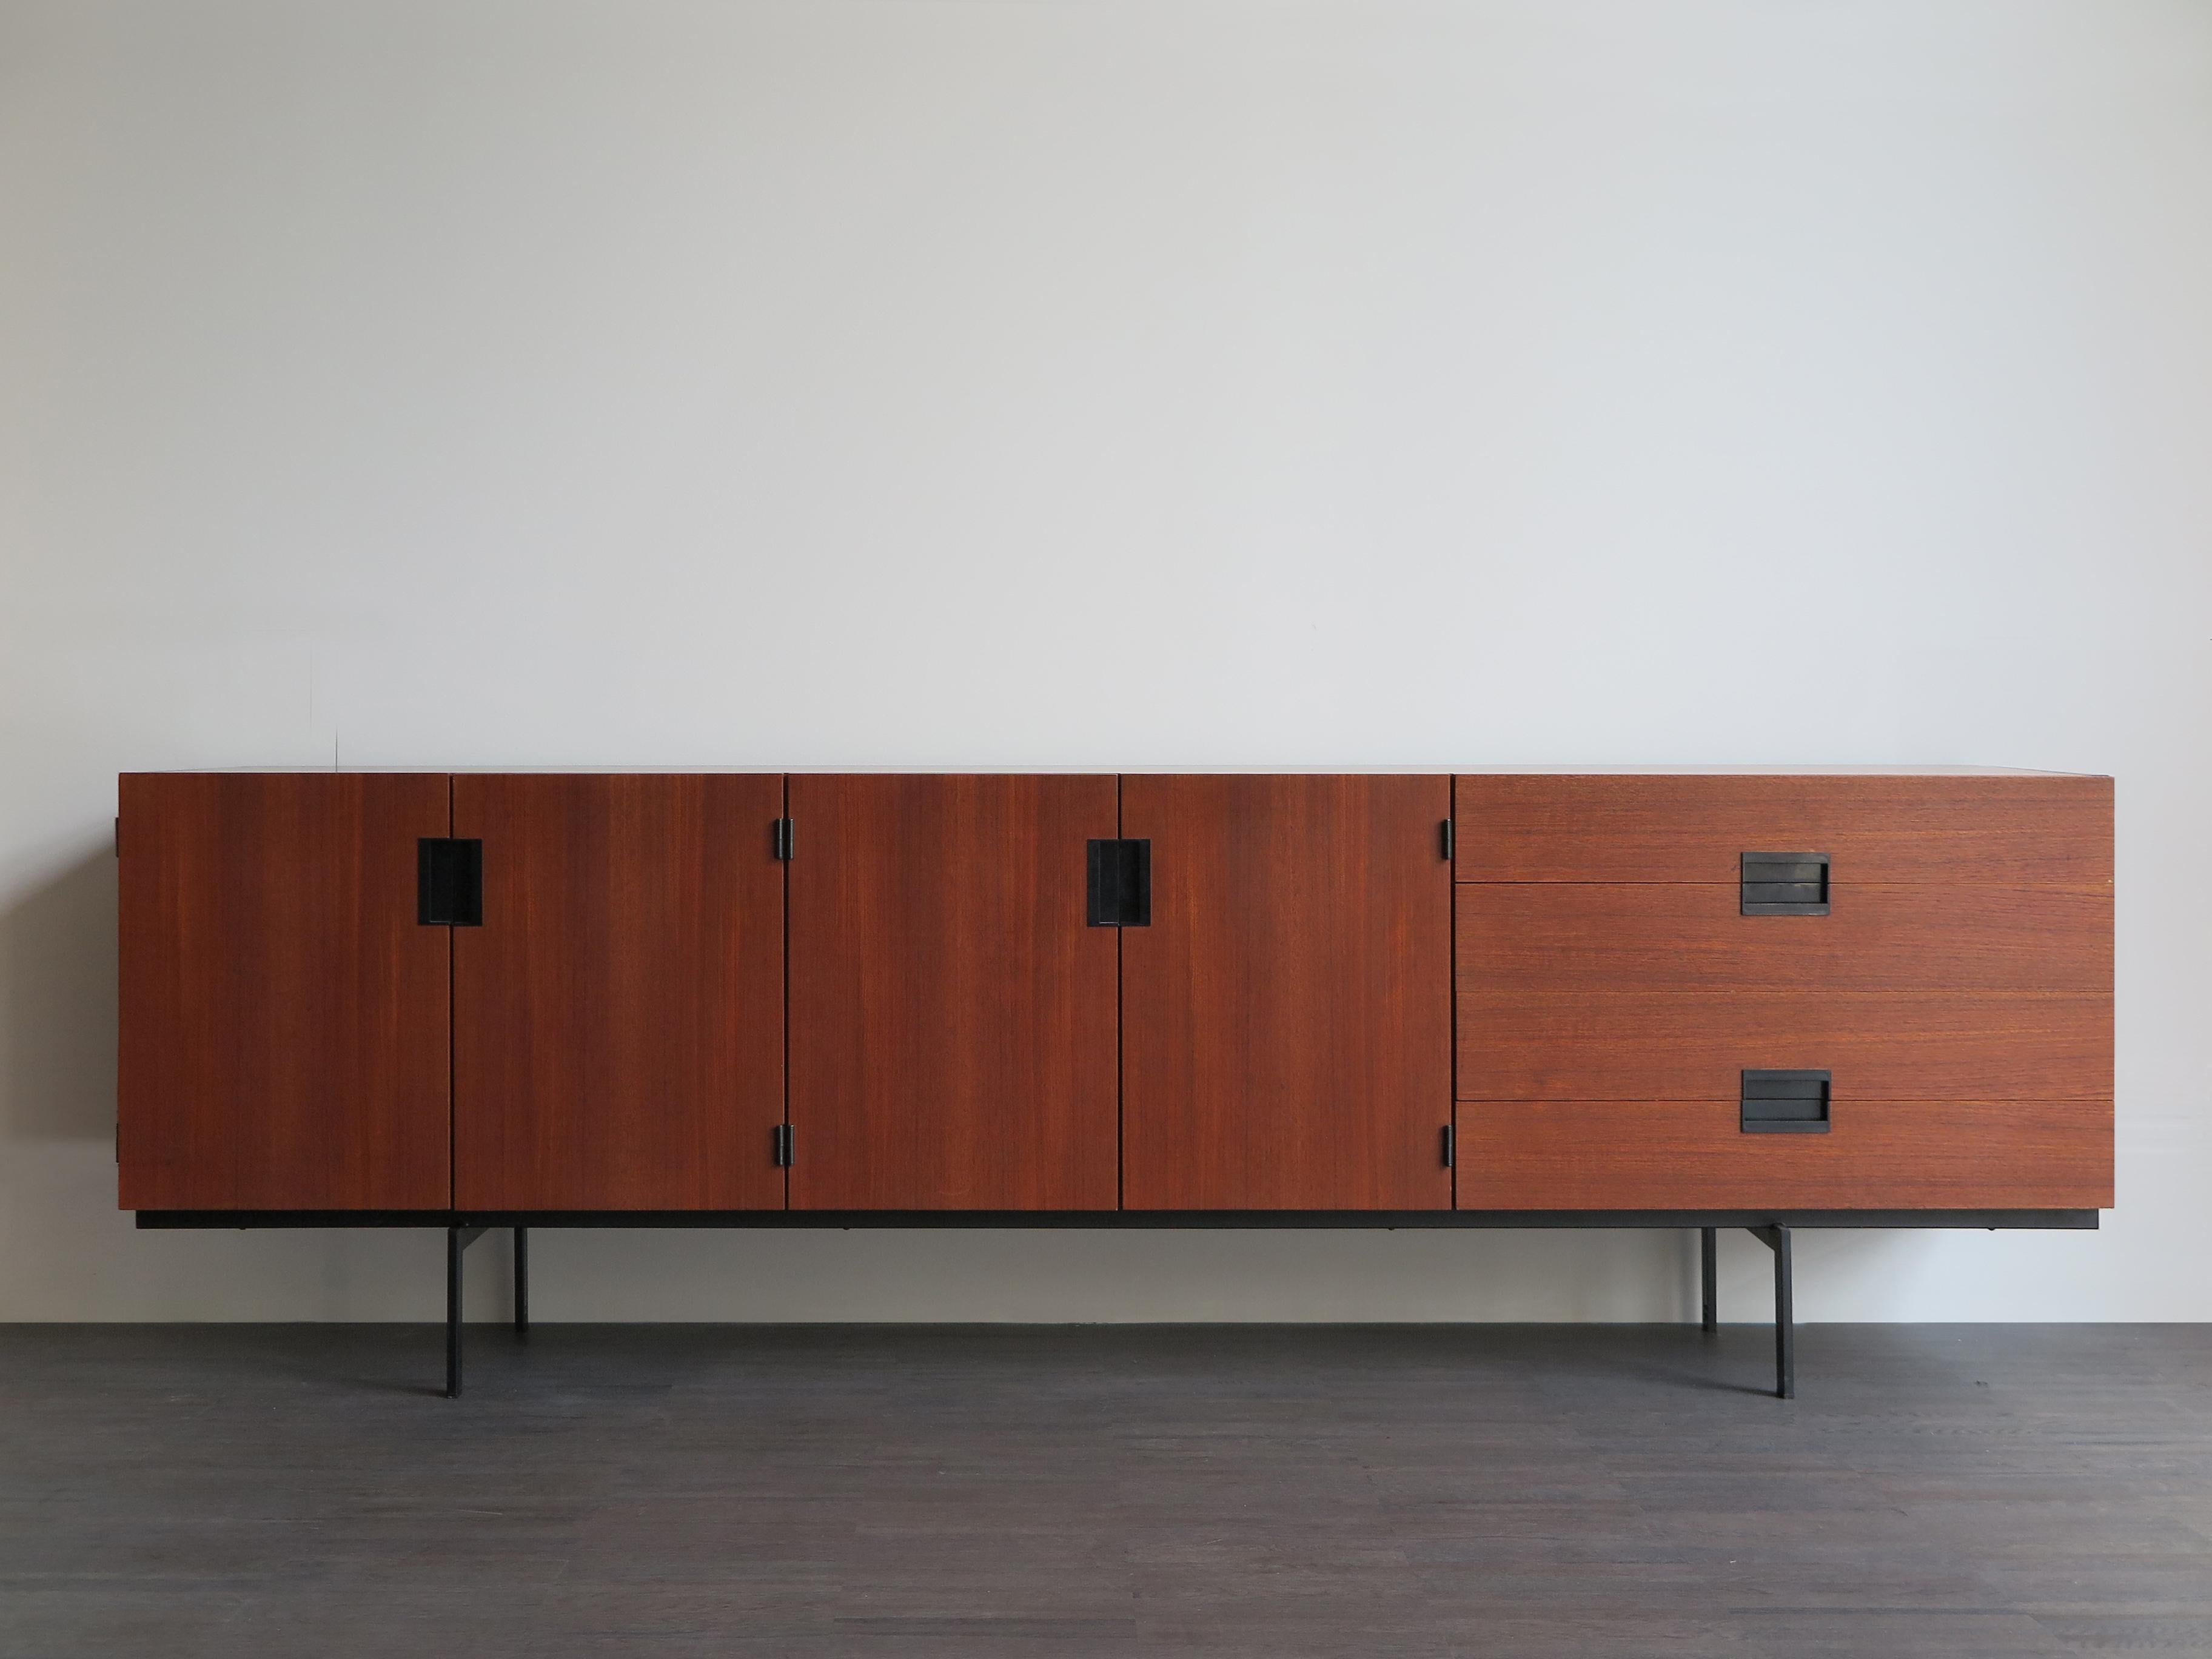 Modern sideboard designed by Cees Braakman and produced by the Dutch company UMS Pastoe in 1955, it was later renamed to the ‘Japanese Series’ because of its sleek form, Minimalist and simplicity.
Covered in teak veneer with black details and a